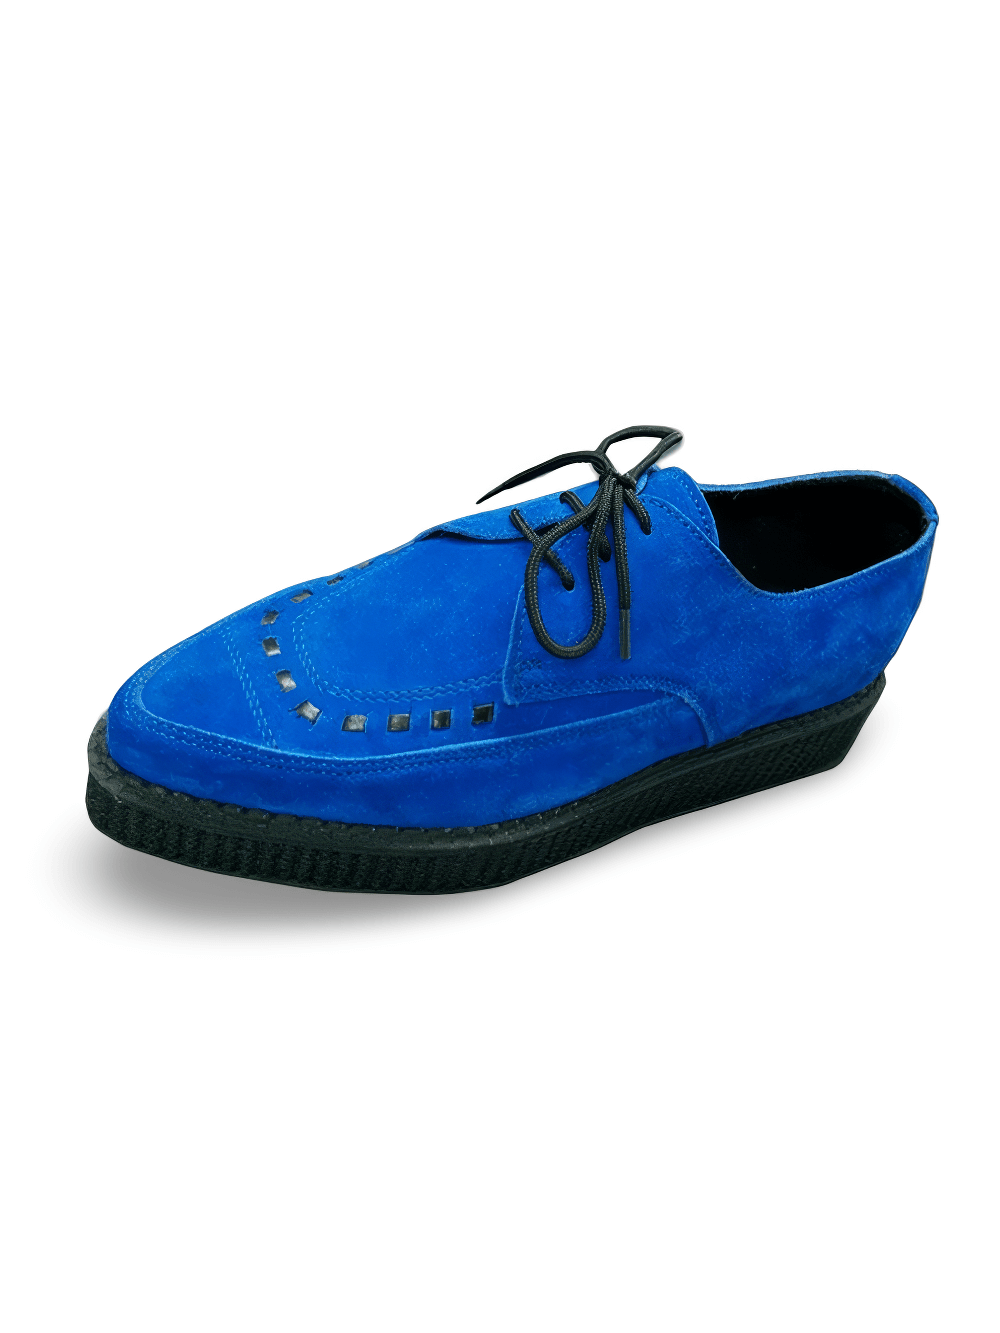 Unisex Lace-Up Creeper Shoes with Suede Pointed Finish